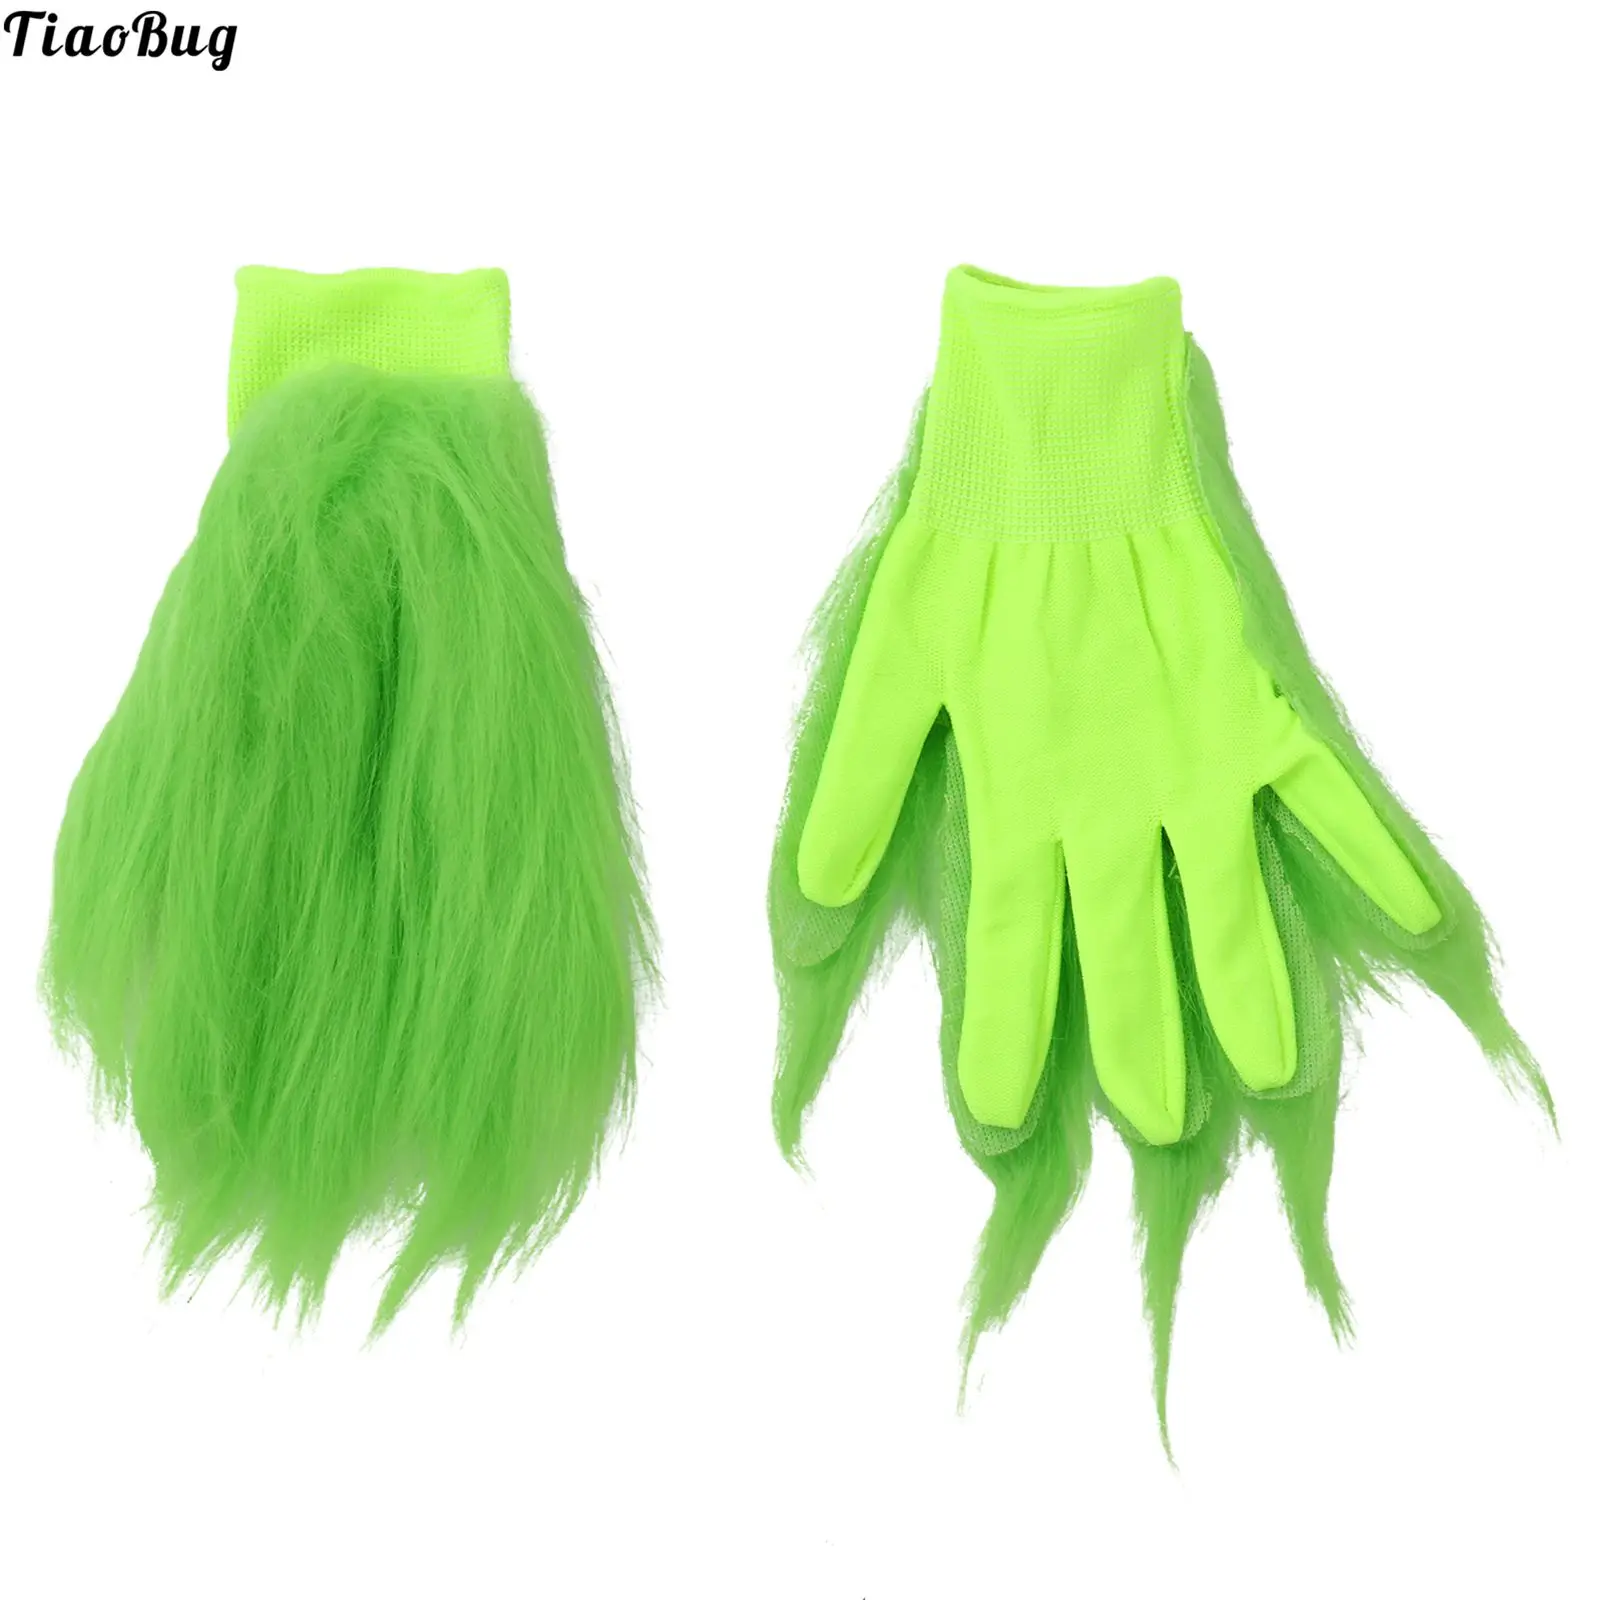 TiaoBug 1 Pair Halloween Party Green Kids Gloves Children Cosplay Props For Stage Performances Easter Party Dress-up Cosplay